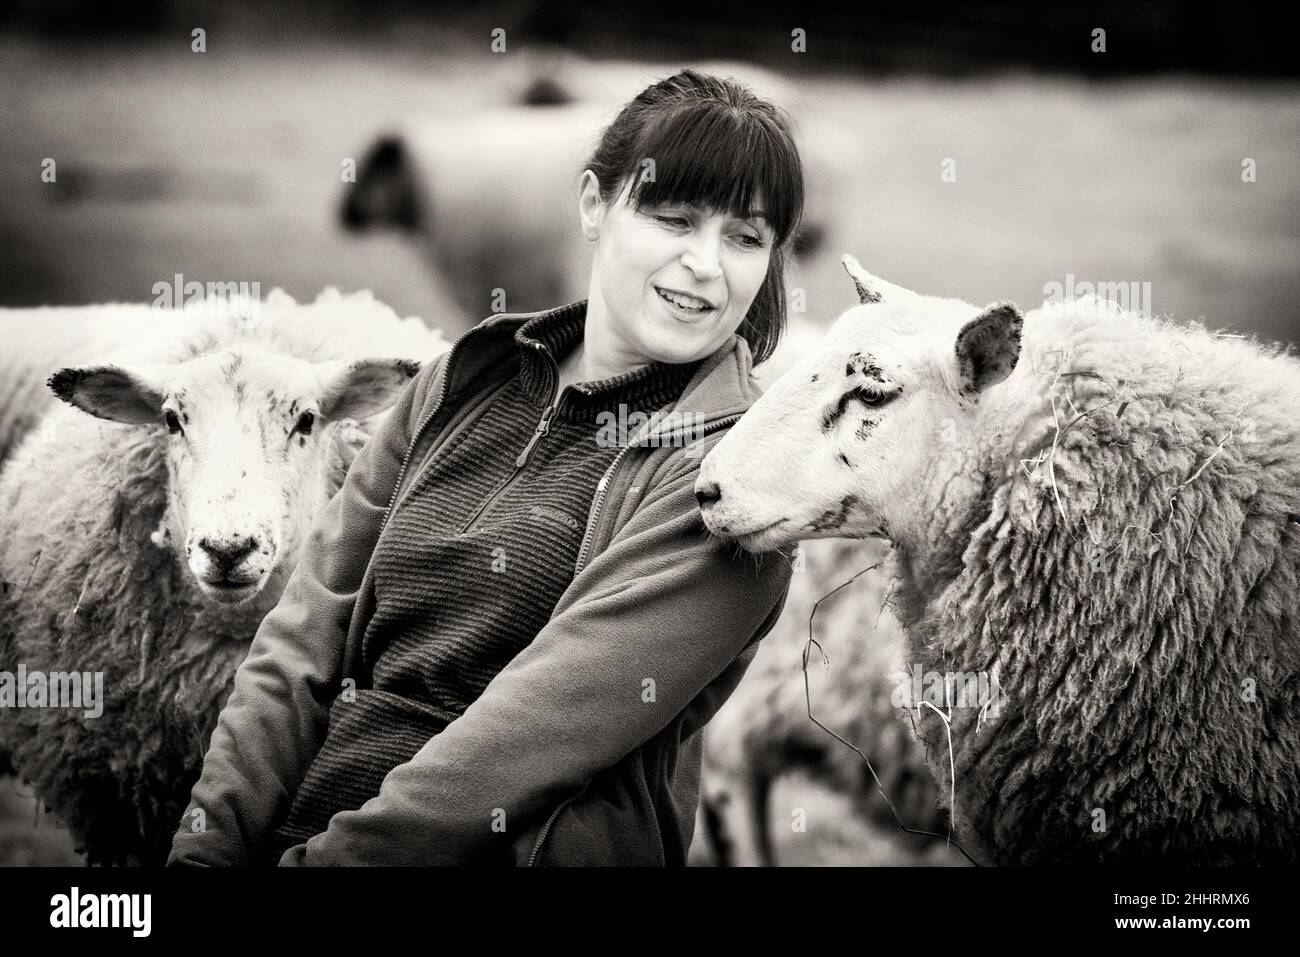 The Vegan Shepherdess.  Images of a woman in northern Scotland who cares for a small flock of sheep, many of which have age and health issues. Stock Photo